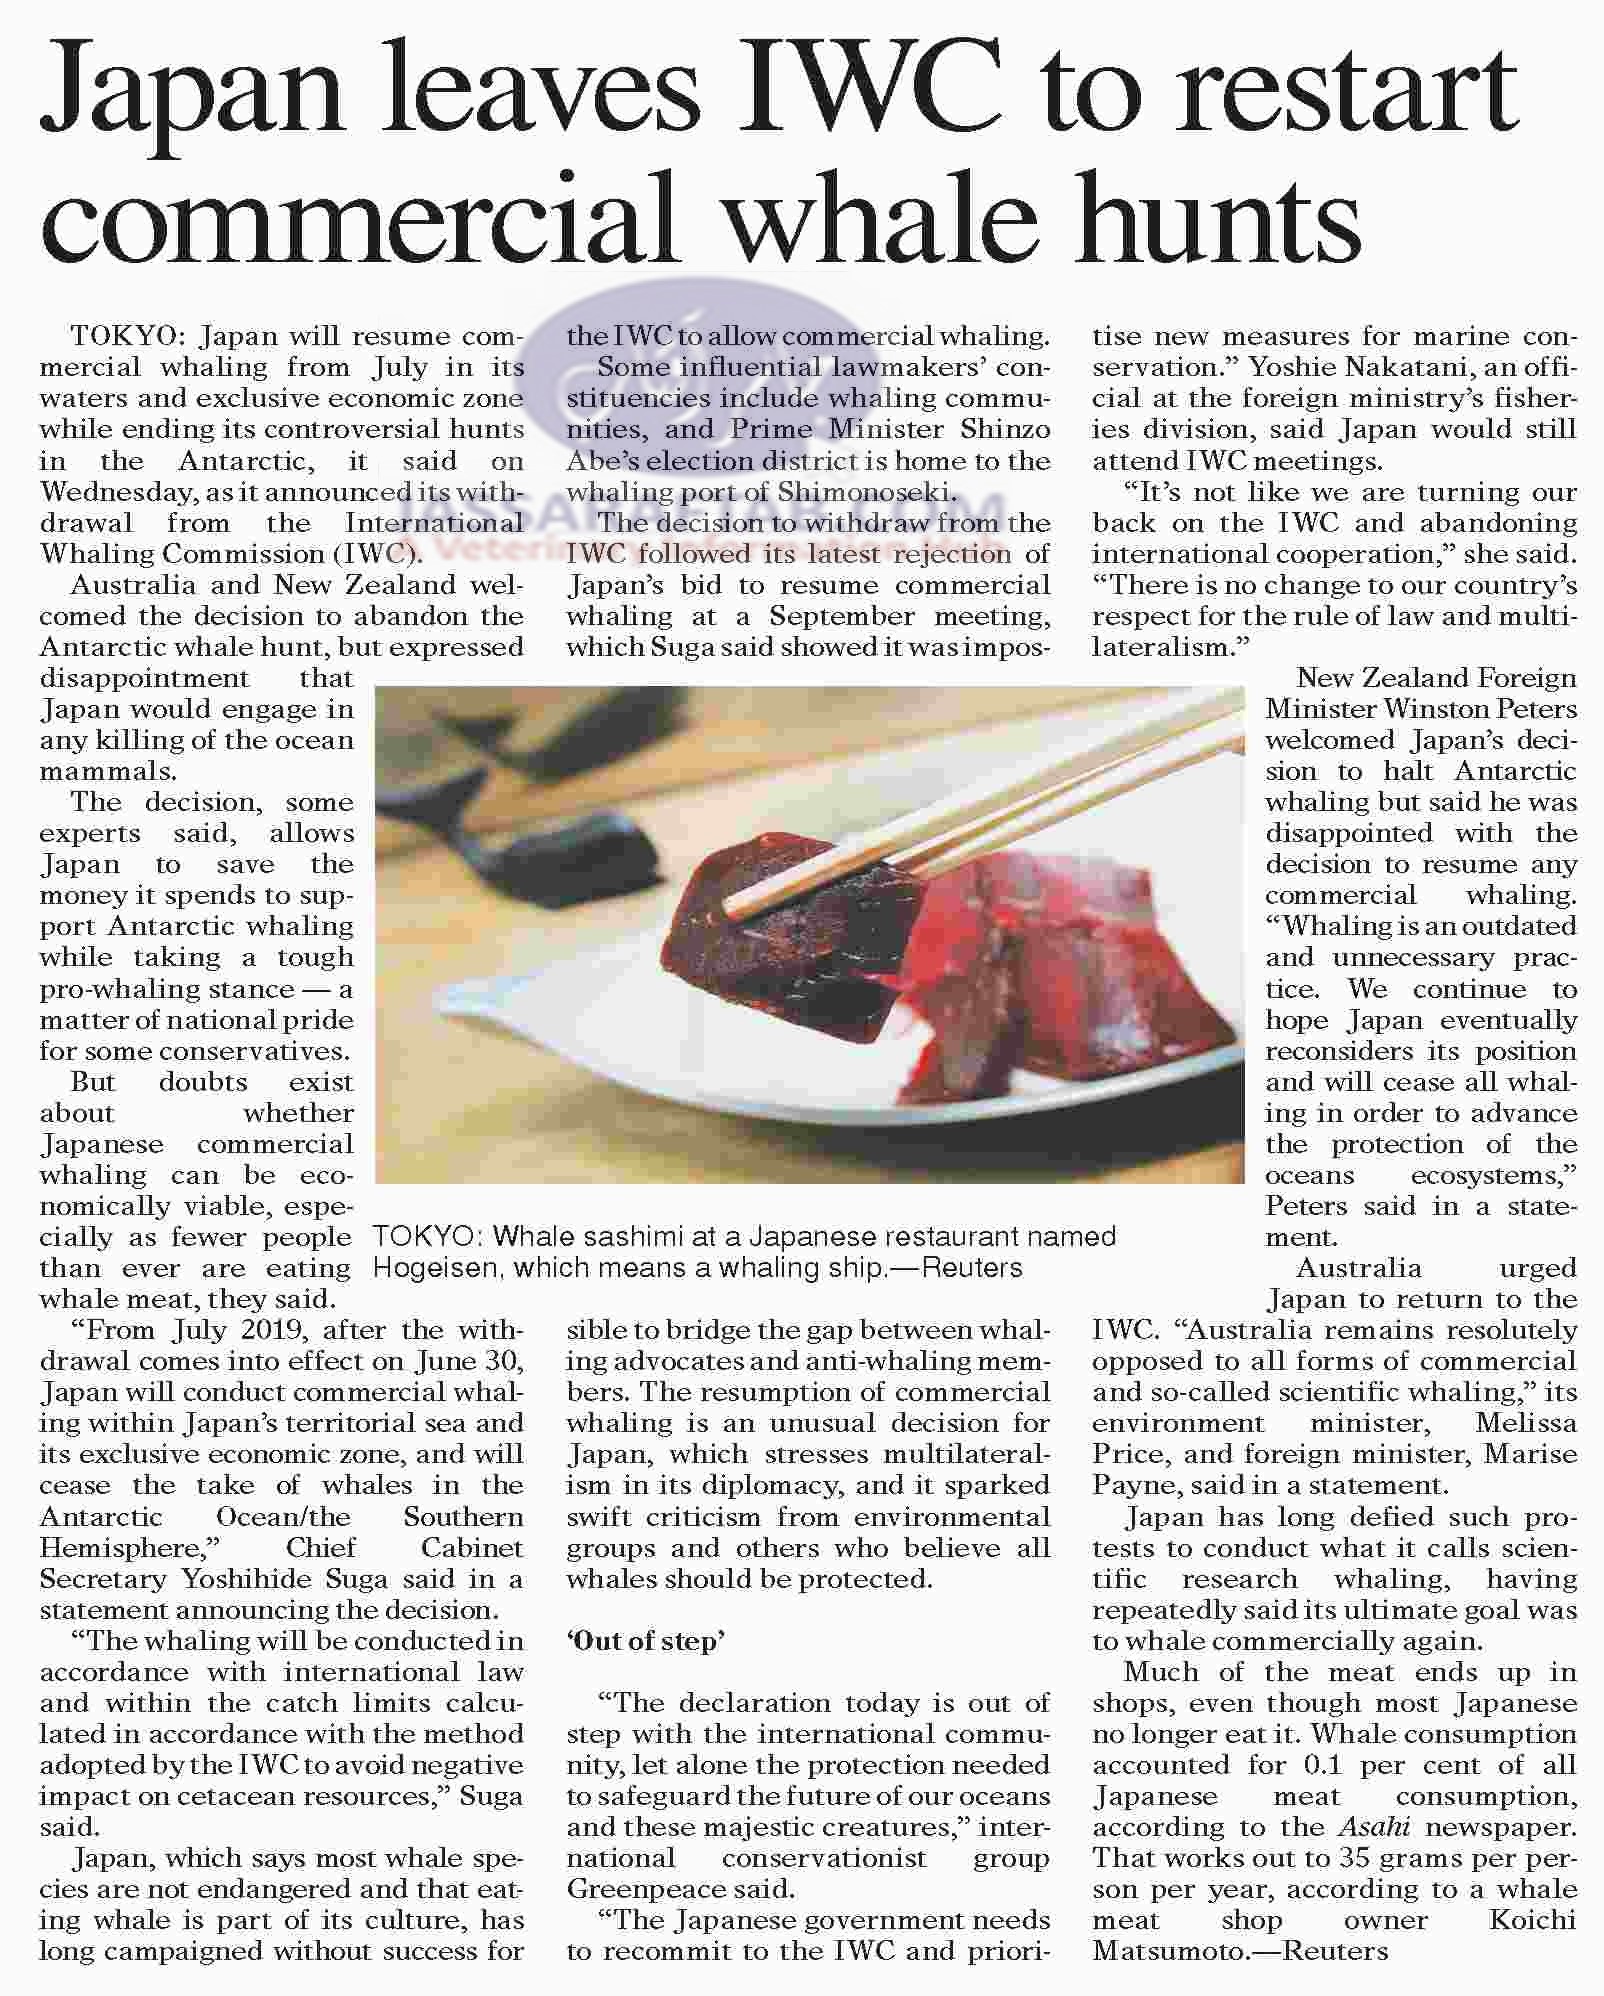 Japan left international whaling commission as resumed commercial whaling. Japan resume whale hunting in its economic zone but stop Antarctic Whale killing.